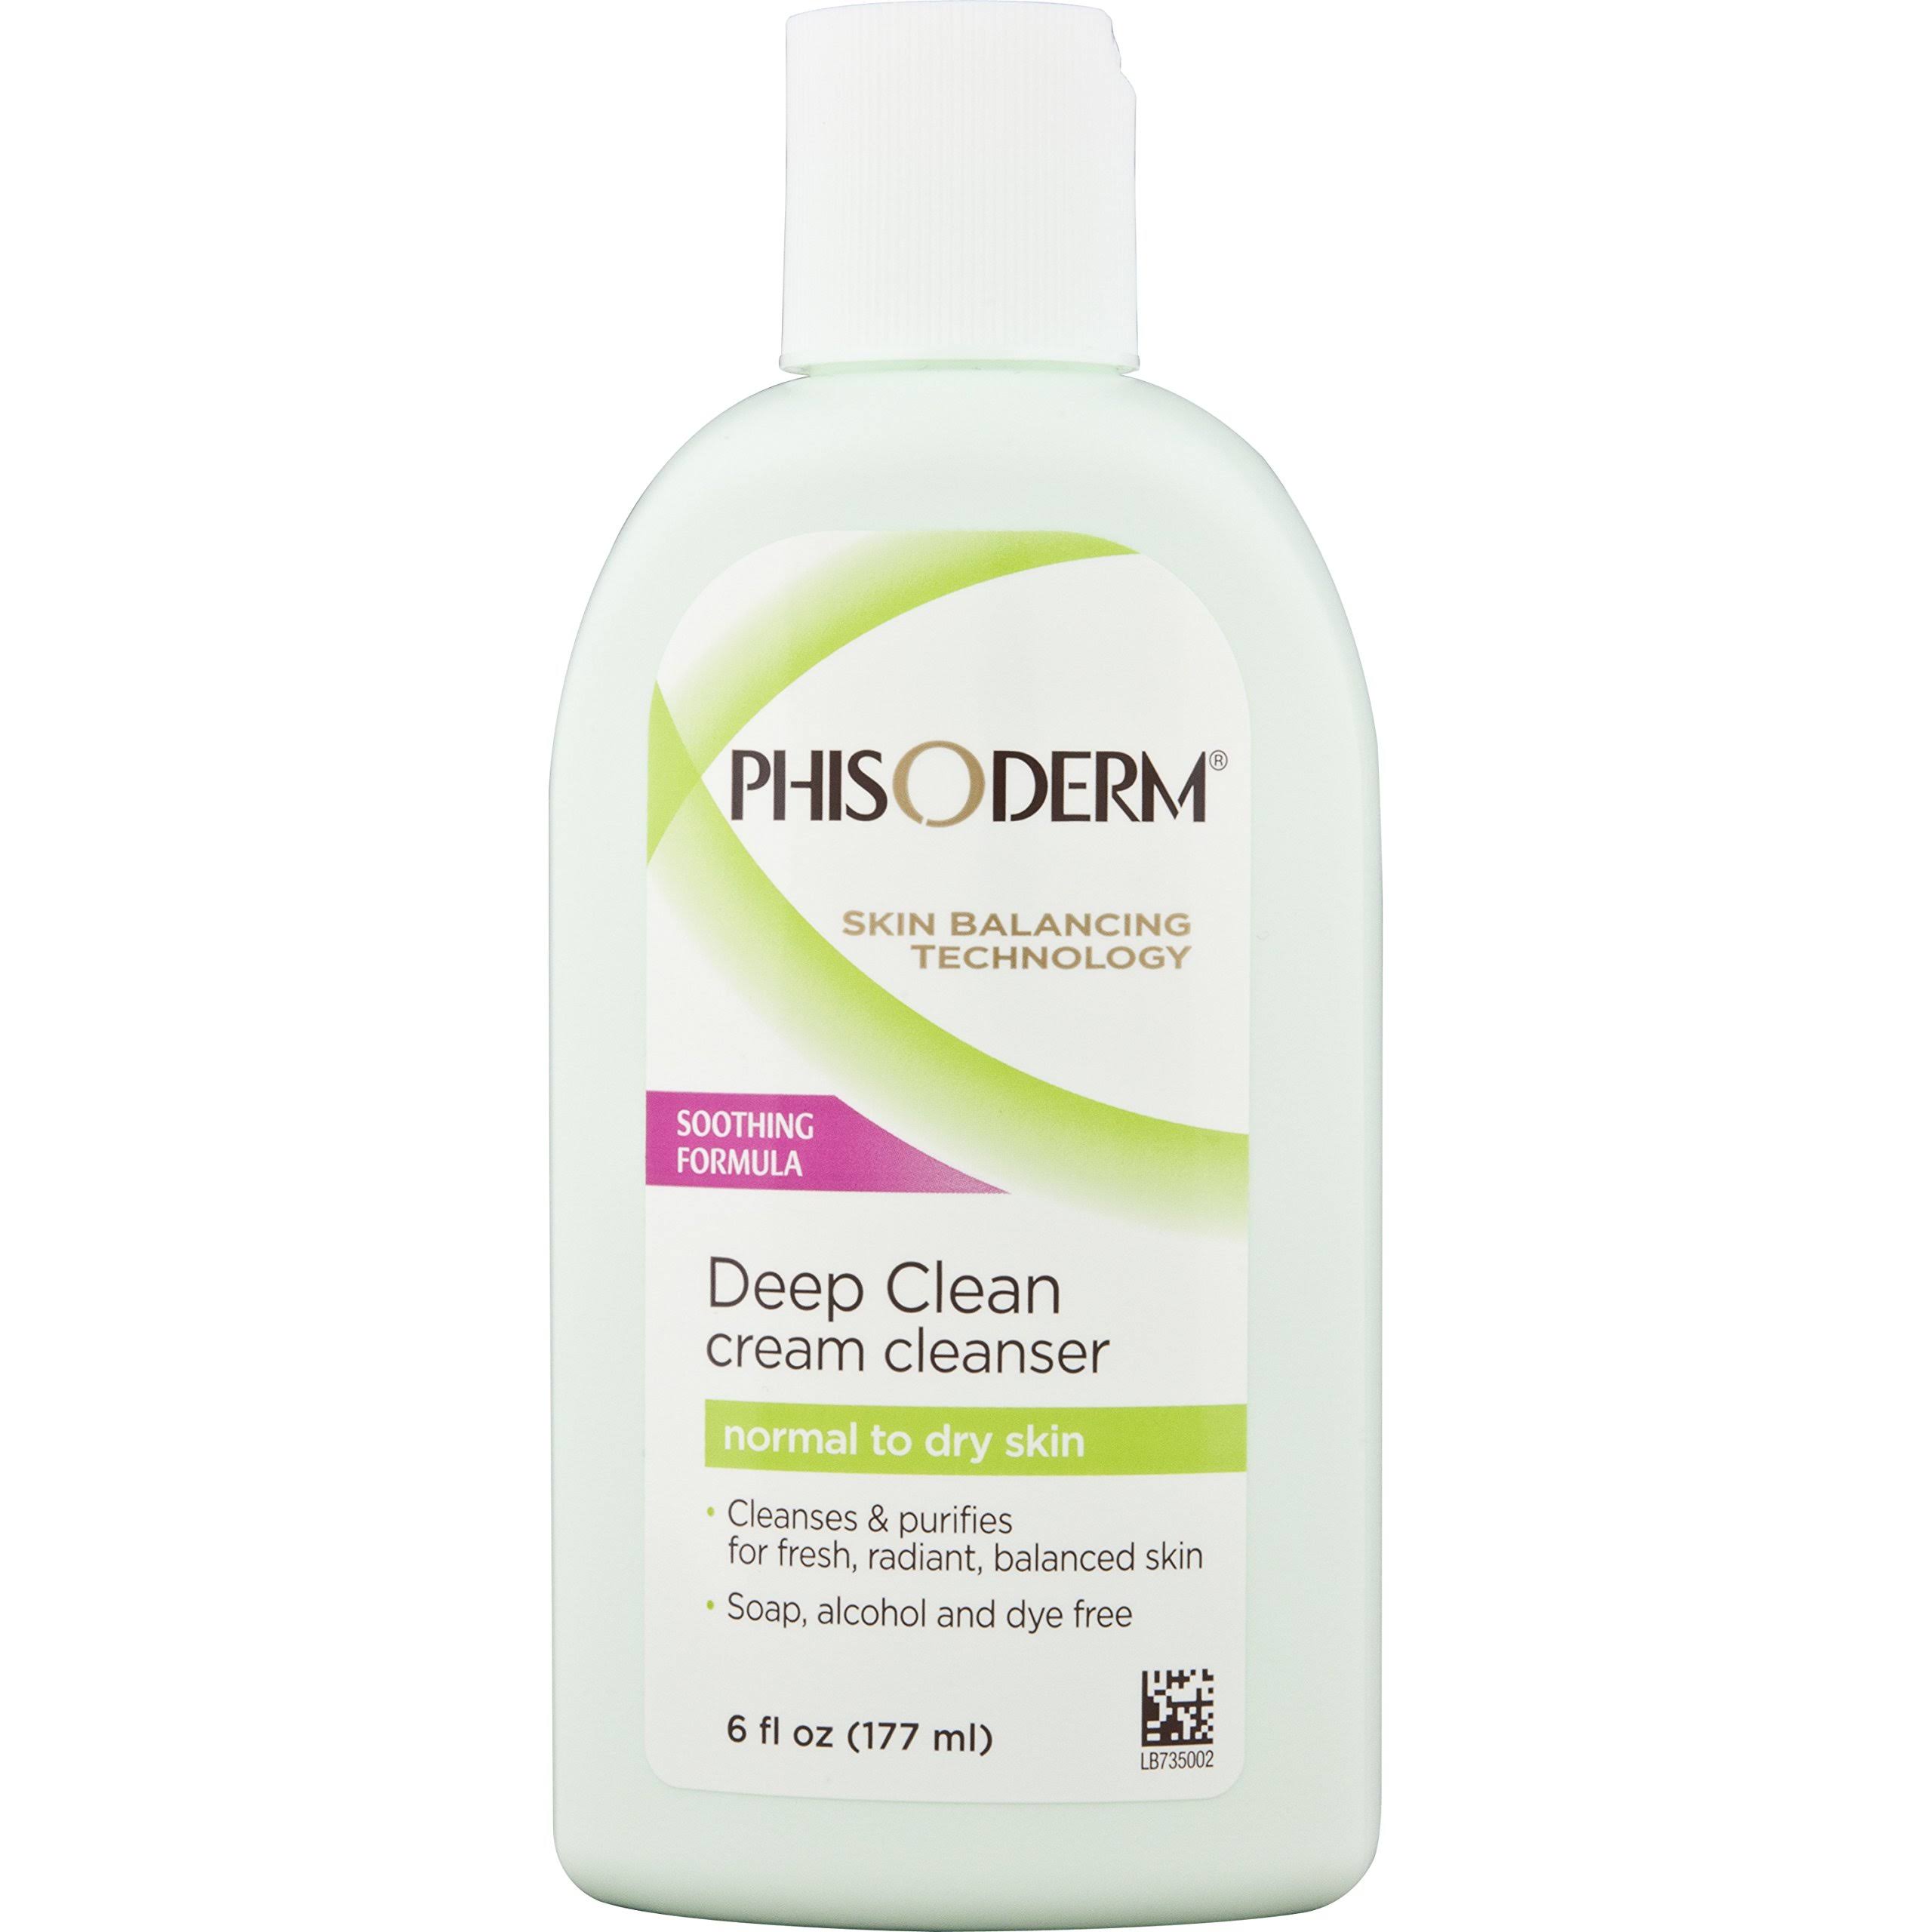 Phisoderm Deep Clean Cream Cleanser - Normal to Dry Skin, 6 oz